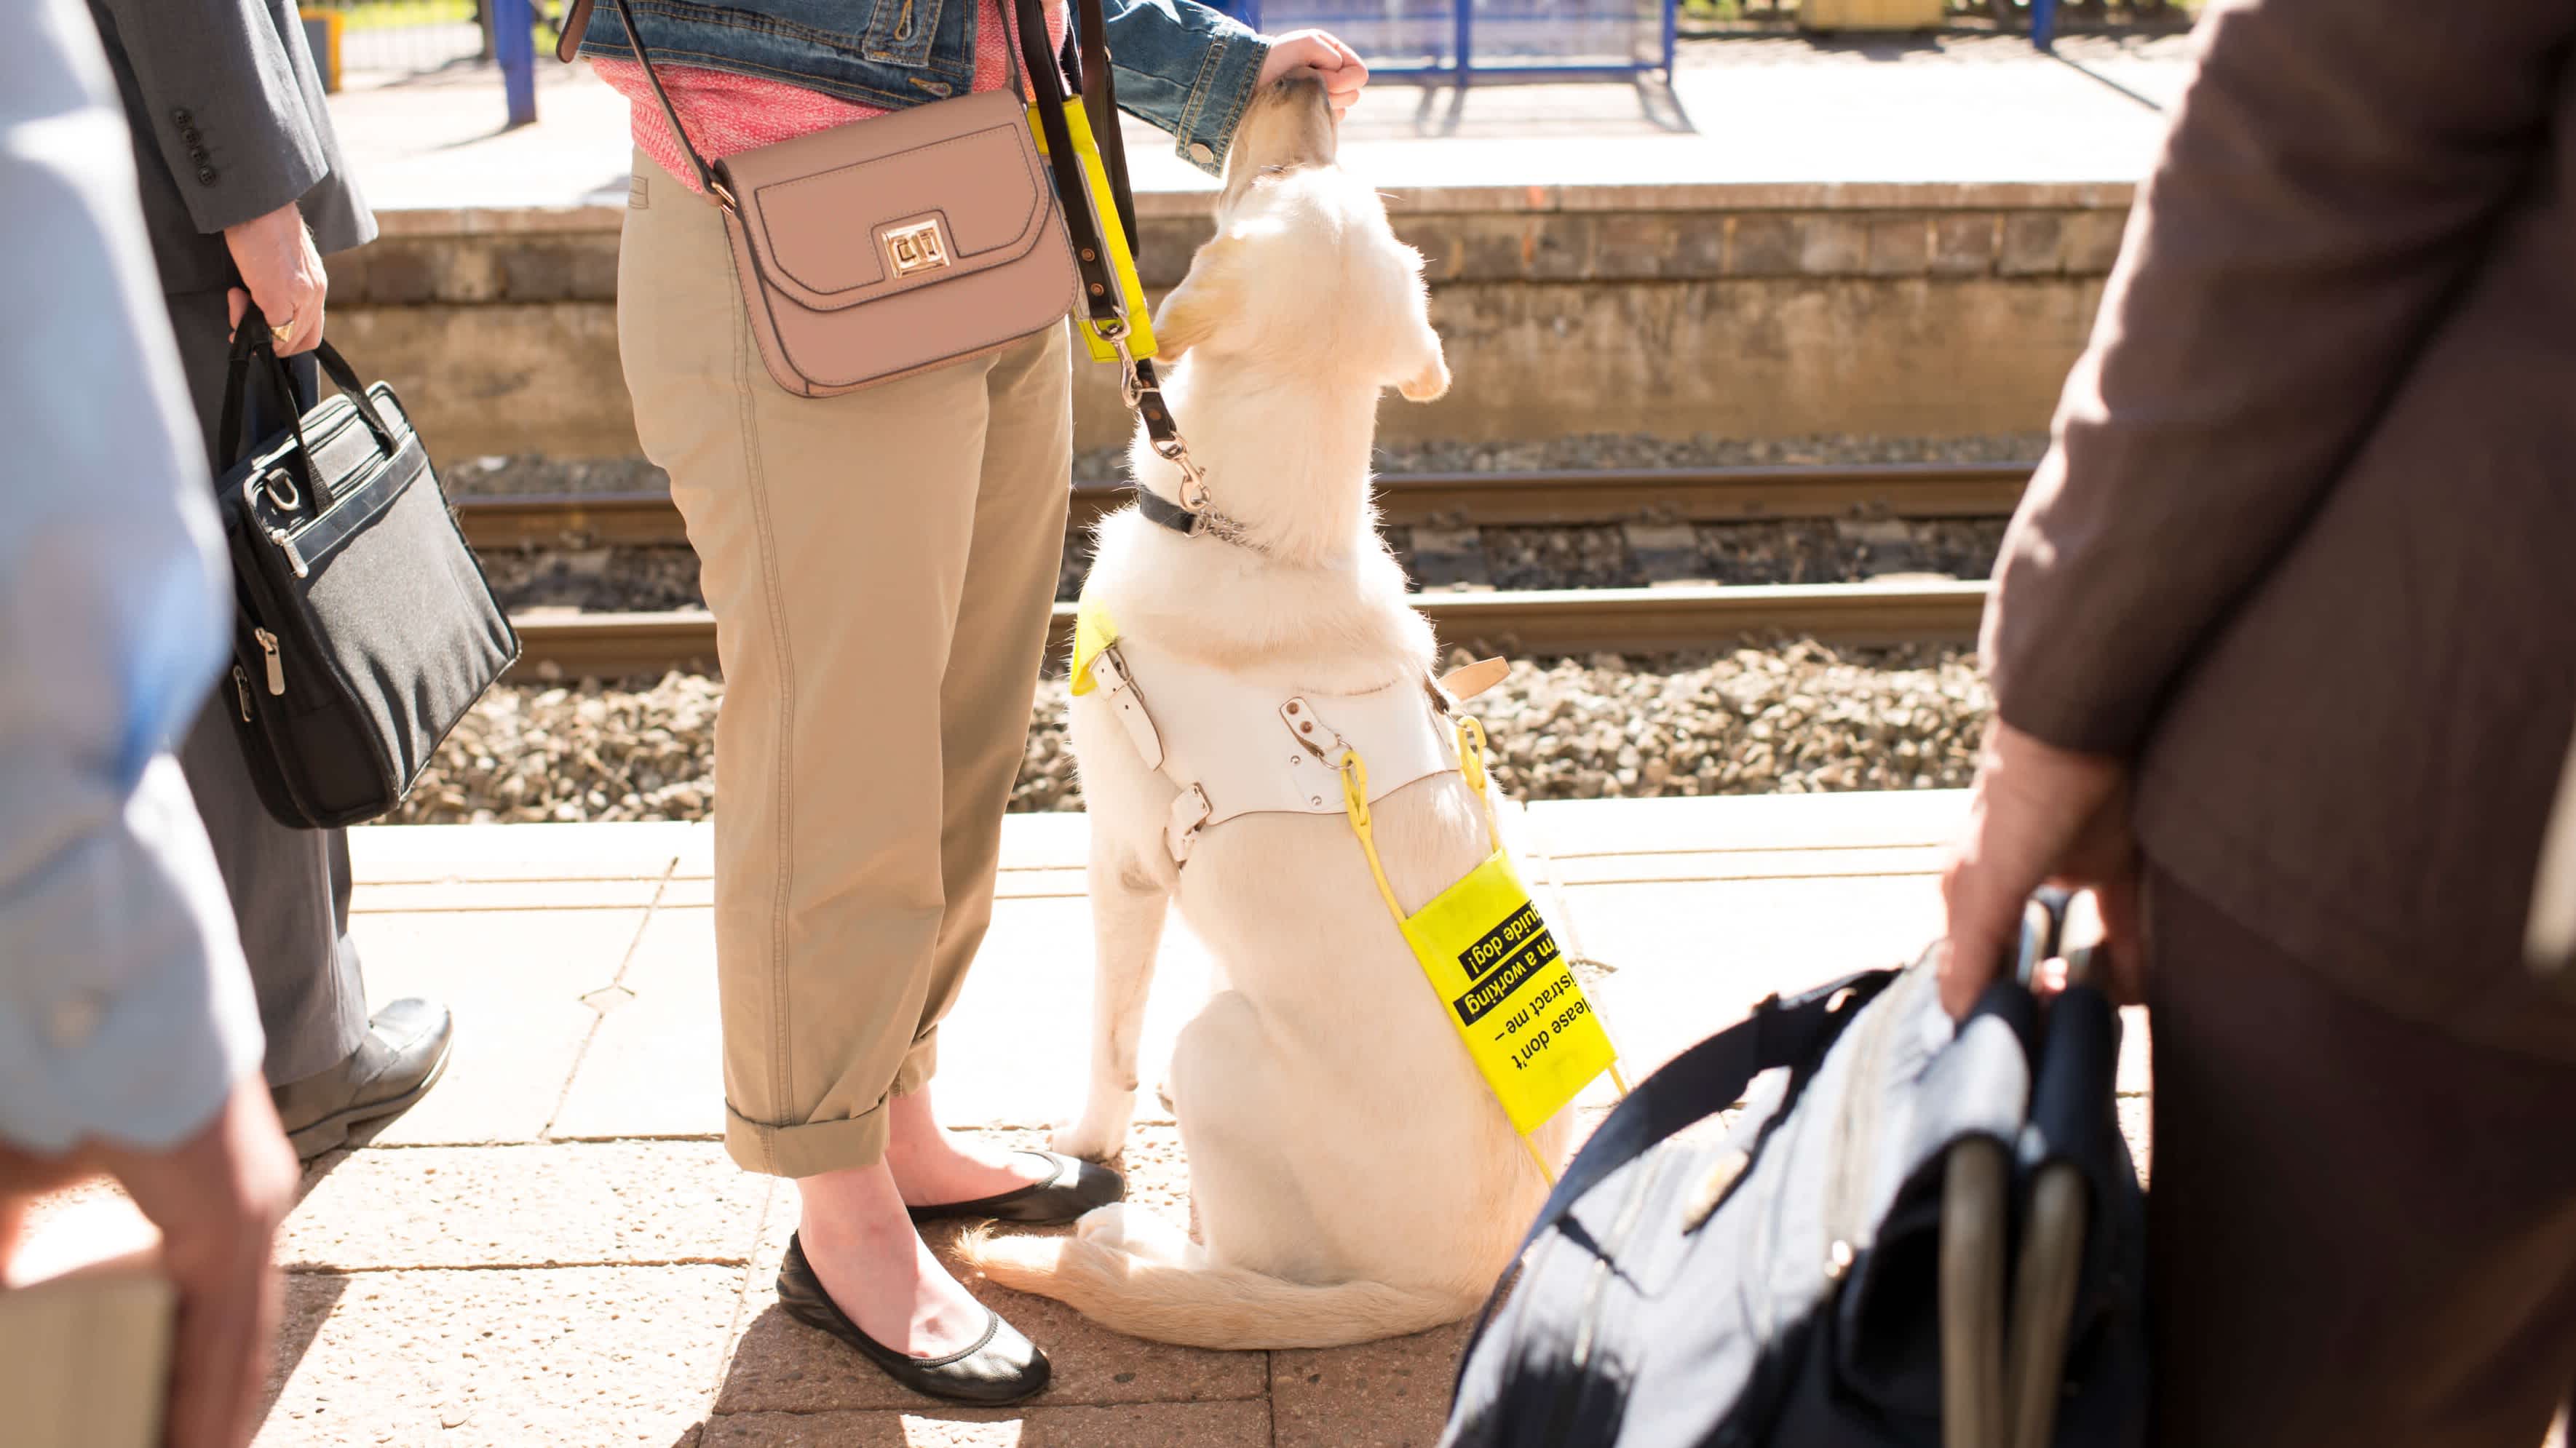 A yellow guide dog sits on a sunny train station platform surrounded by other passengers. The owner feeds the dog a treat.